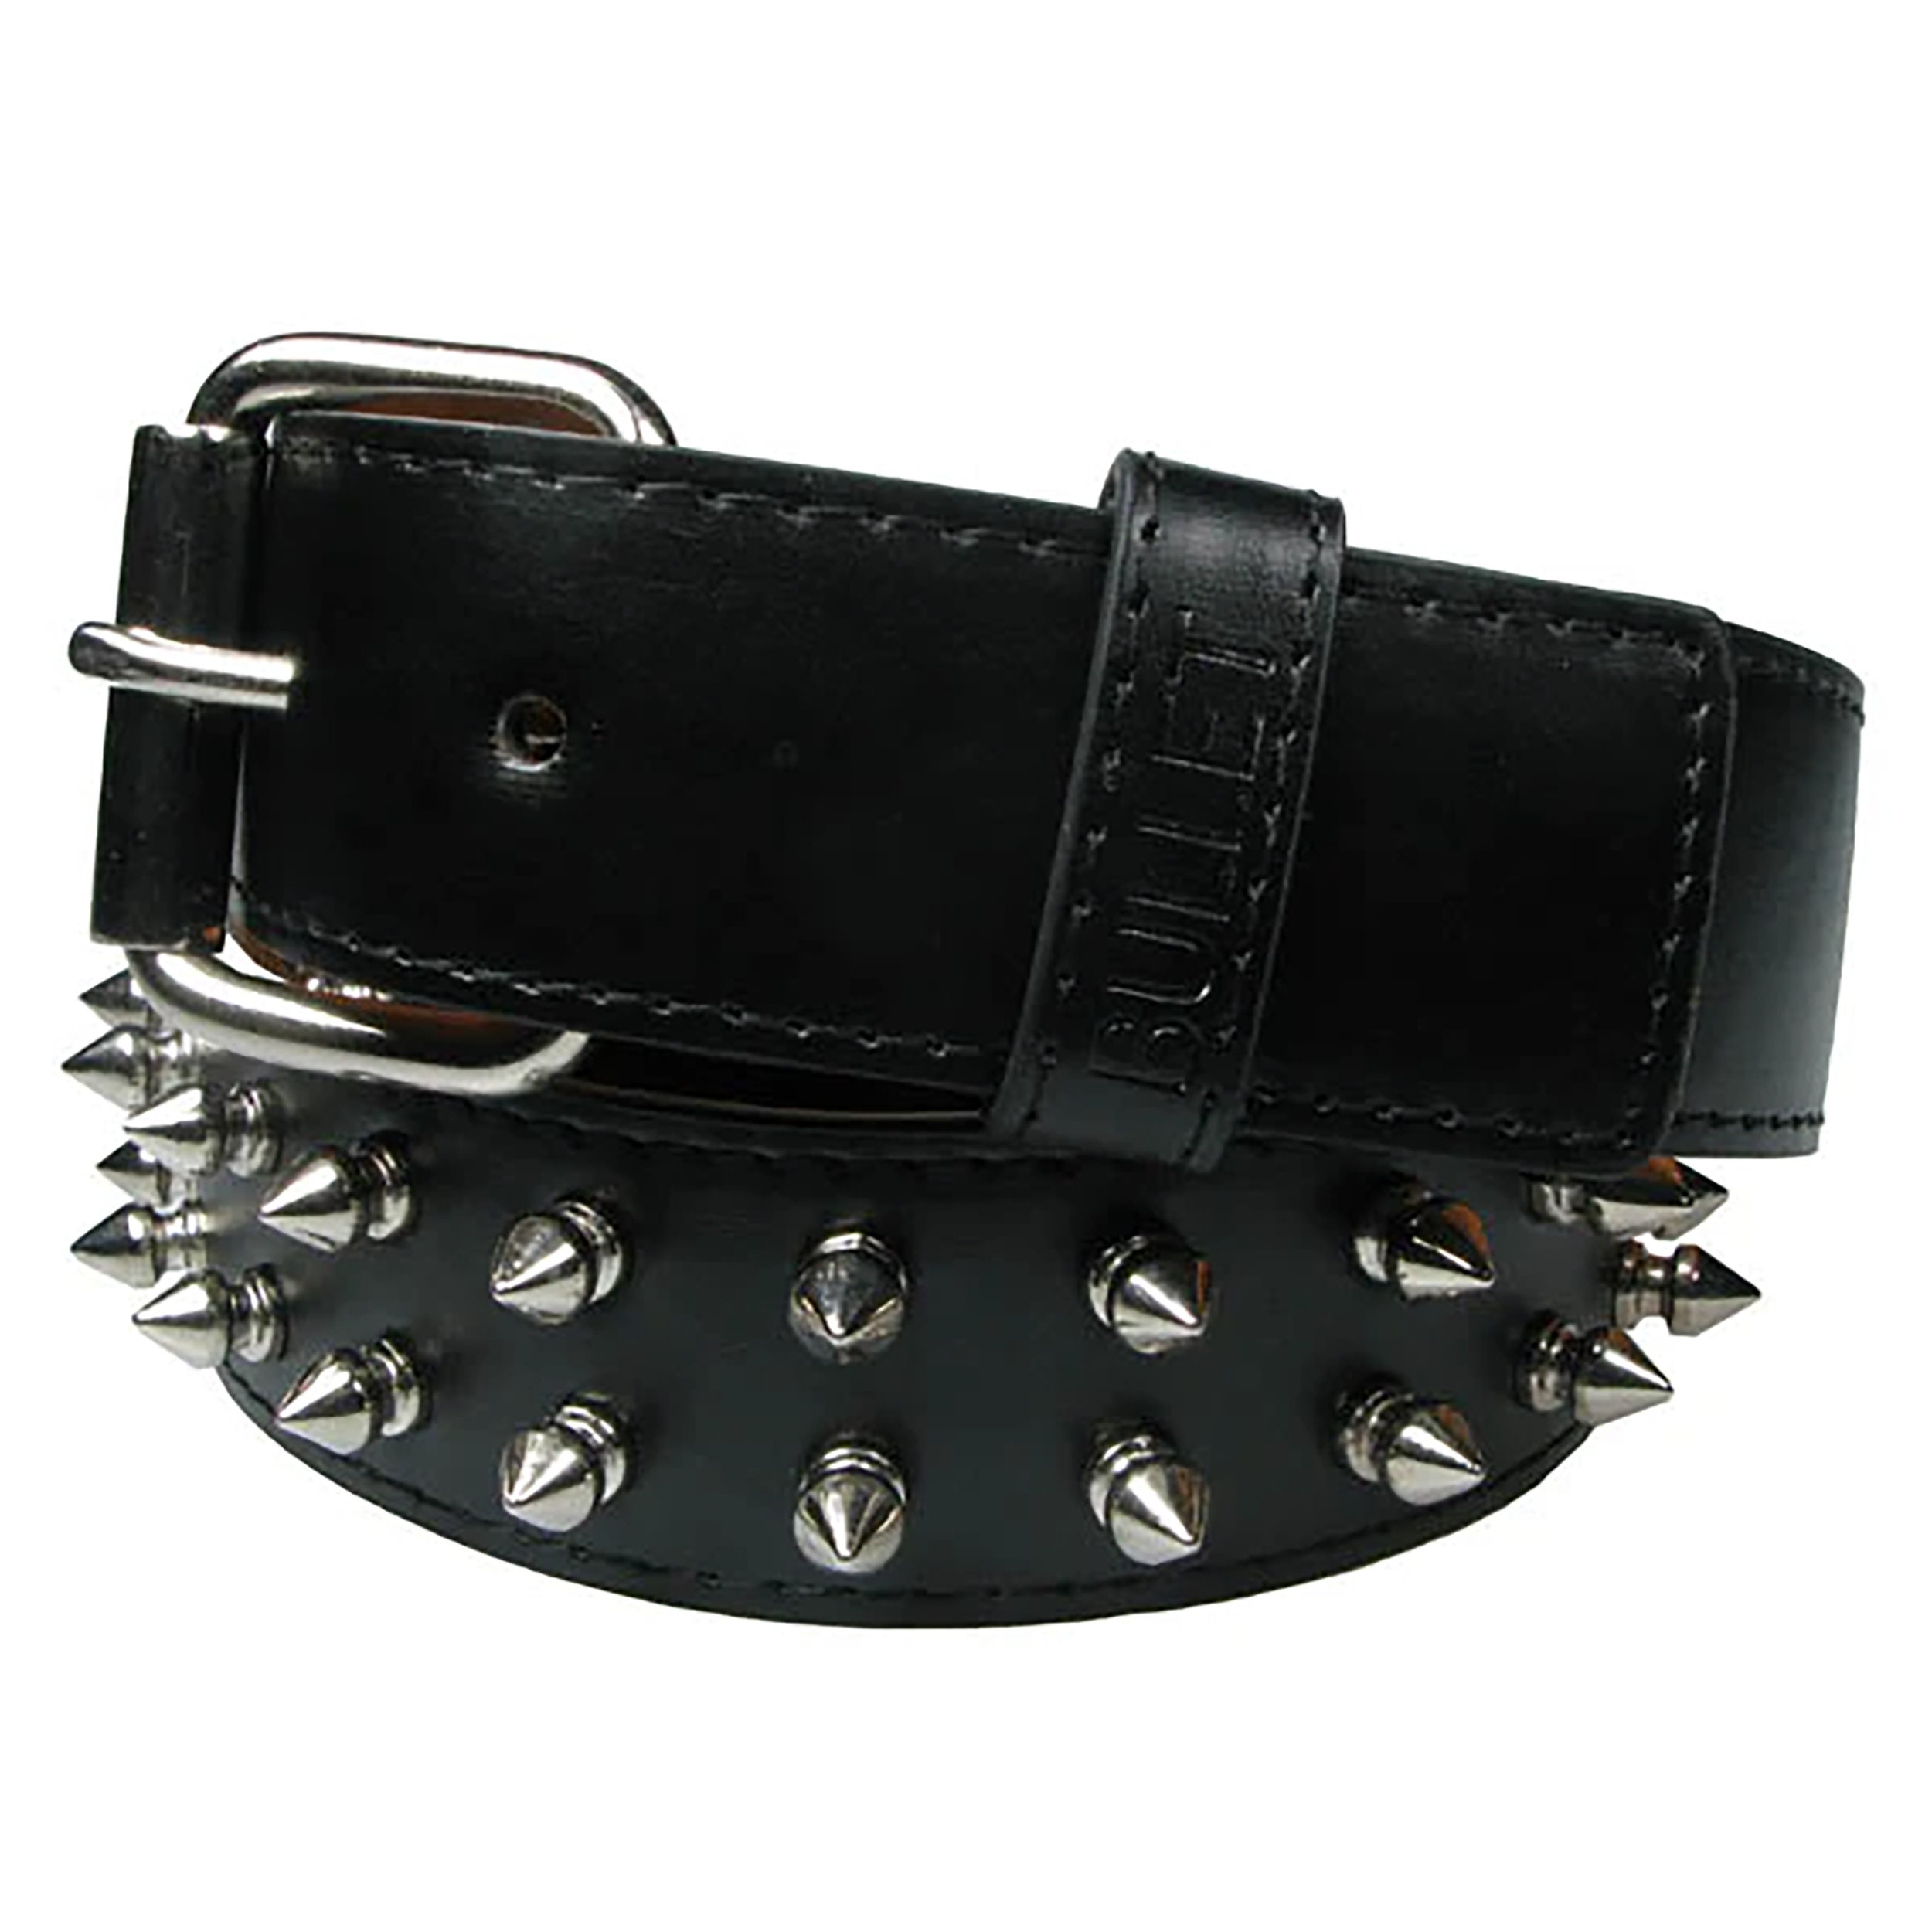 Stud Belt With Spike Studs. Studded Belt With 1 2 3 or 4 - Etsy UK